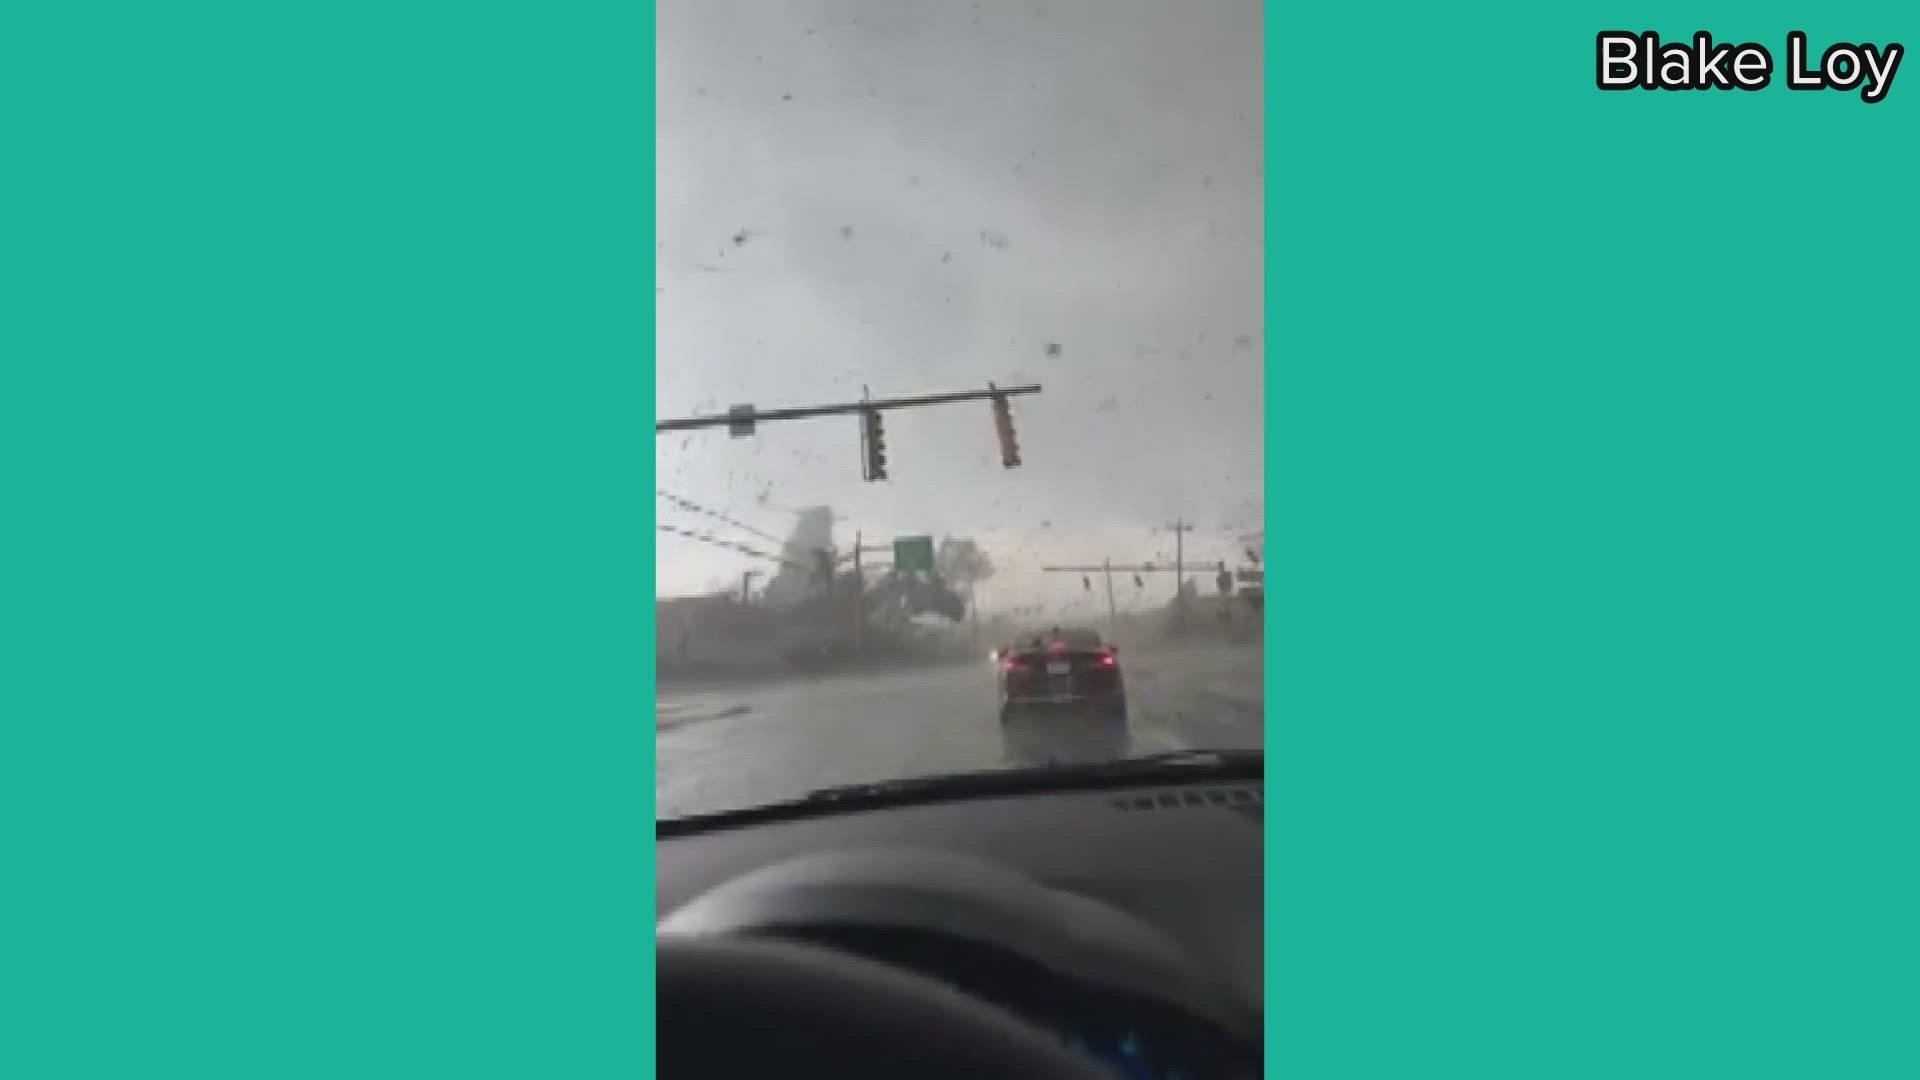 This video, which shows a strong storm hitting Point Place in Toledo, Ohio, was submitted by Blake Loy.